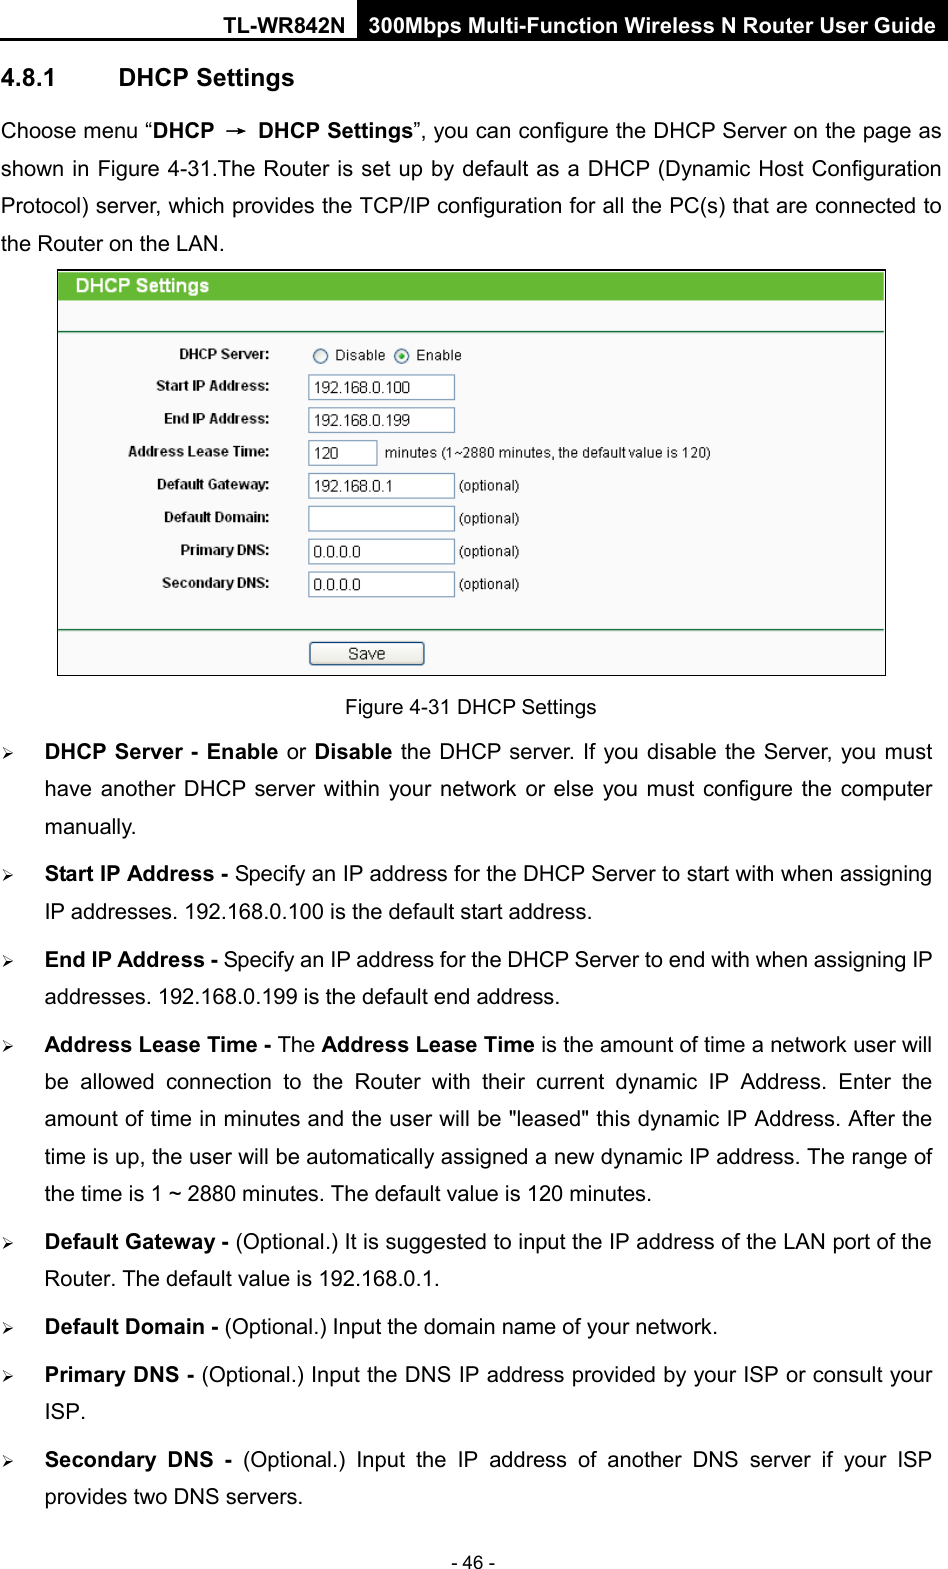 TL-WR842N 300Mbps Multi-Function Wireless N Router User Guide  - 46 - 4.8.1 DHCP Settings Choose menu “DHCP → DHCP Settings”, you can configure the DHCP Server on the page as shown in Figure 4-31.The Router is set up by default as a DHCP (Dynamic Host Configuration Protocol) server, which provides the TCP/IP configuration for all the PC(s) that are connected to the Router on the LAN.    Figure 4-31 DHCP Settings  DHCP Server - Enable or Disable the DHCP server. If you disable the Server, you must have another DHCP server within your network or else you must configure the computer manually.  Start IP Address - Specify an IP address for the DHCP Server to start with when assigning IP addresses. 192.168.0.100 is the default start address.  End IP Address - Specify an IP address for the DHCP Server to end with when assigning IP addresses. 192.168.0.199 is the default end address.  Address Lease Time - The Address Lease Time is the amount of time a network user will be allowed connection to the Router with their current dynamic IP Address. Enter the amount of time in minutes and the user will be &quot;leased&quot; this dynamic IP Address. After the time is up, the user will be automatically assigned a new dynamic IP address. The range of the time is 1 ~ 2880 minutes. The default value is 120 minutes.  Default Gateway - (Optional.) It is suggested to input the IP address of the LAN port of the Router. The default value is 192.168.0.1.  Default Domain - (Optional.) Input the domain name of your network.  Primary DNS - (Optional.) Input the DNS IP address provided by your ISP or consult your ISP.  Secondary DNS -  (Optional.) Input the IP address of another DNS server if your ISP provides two DNS servers. 